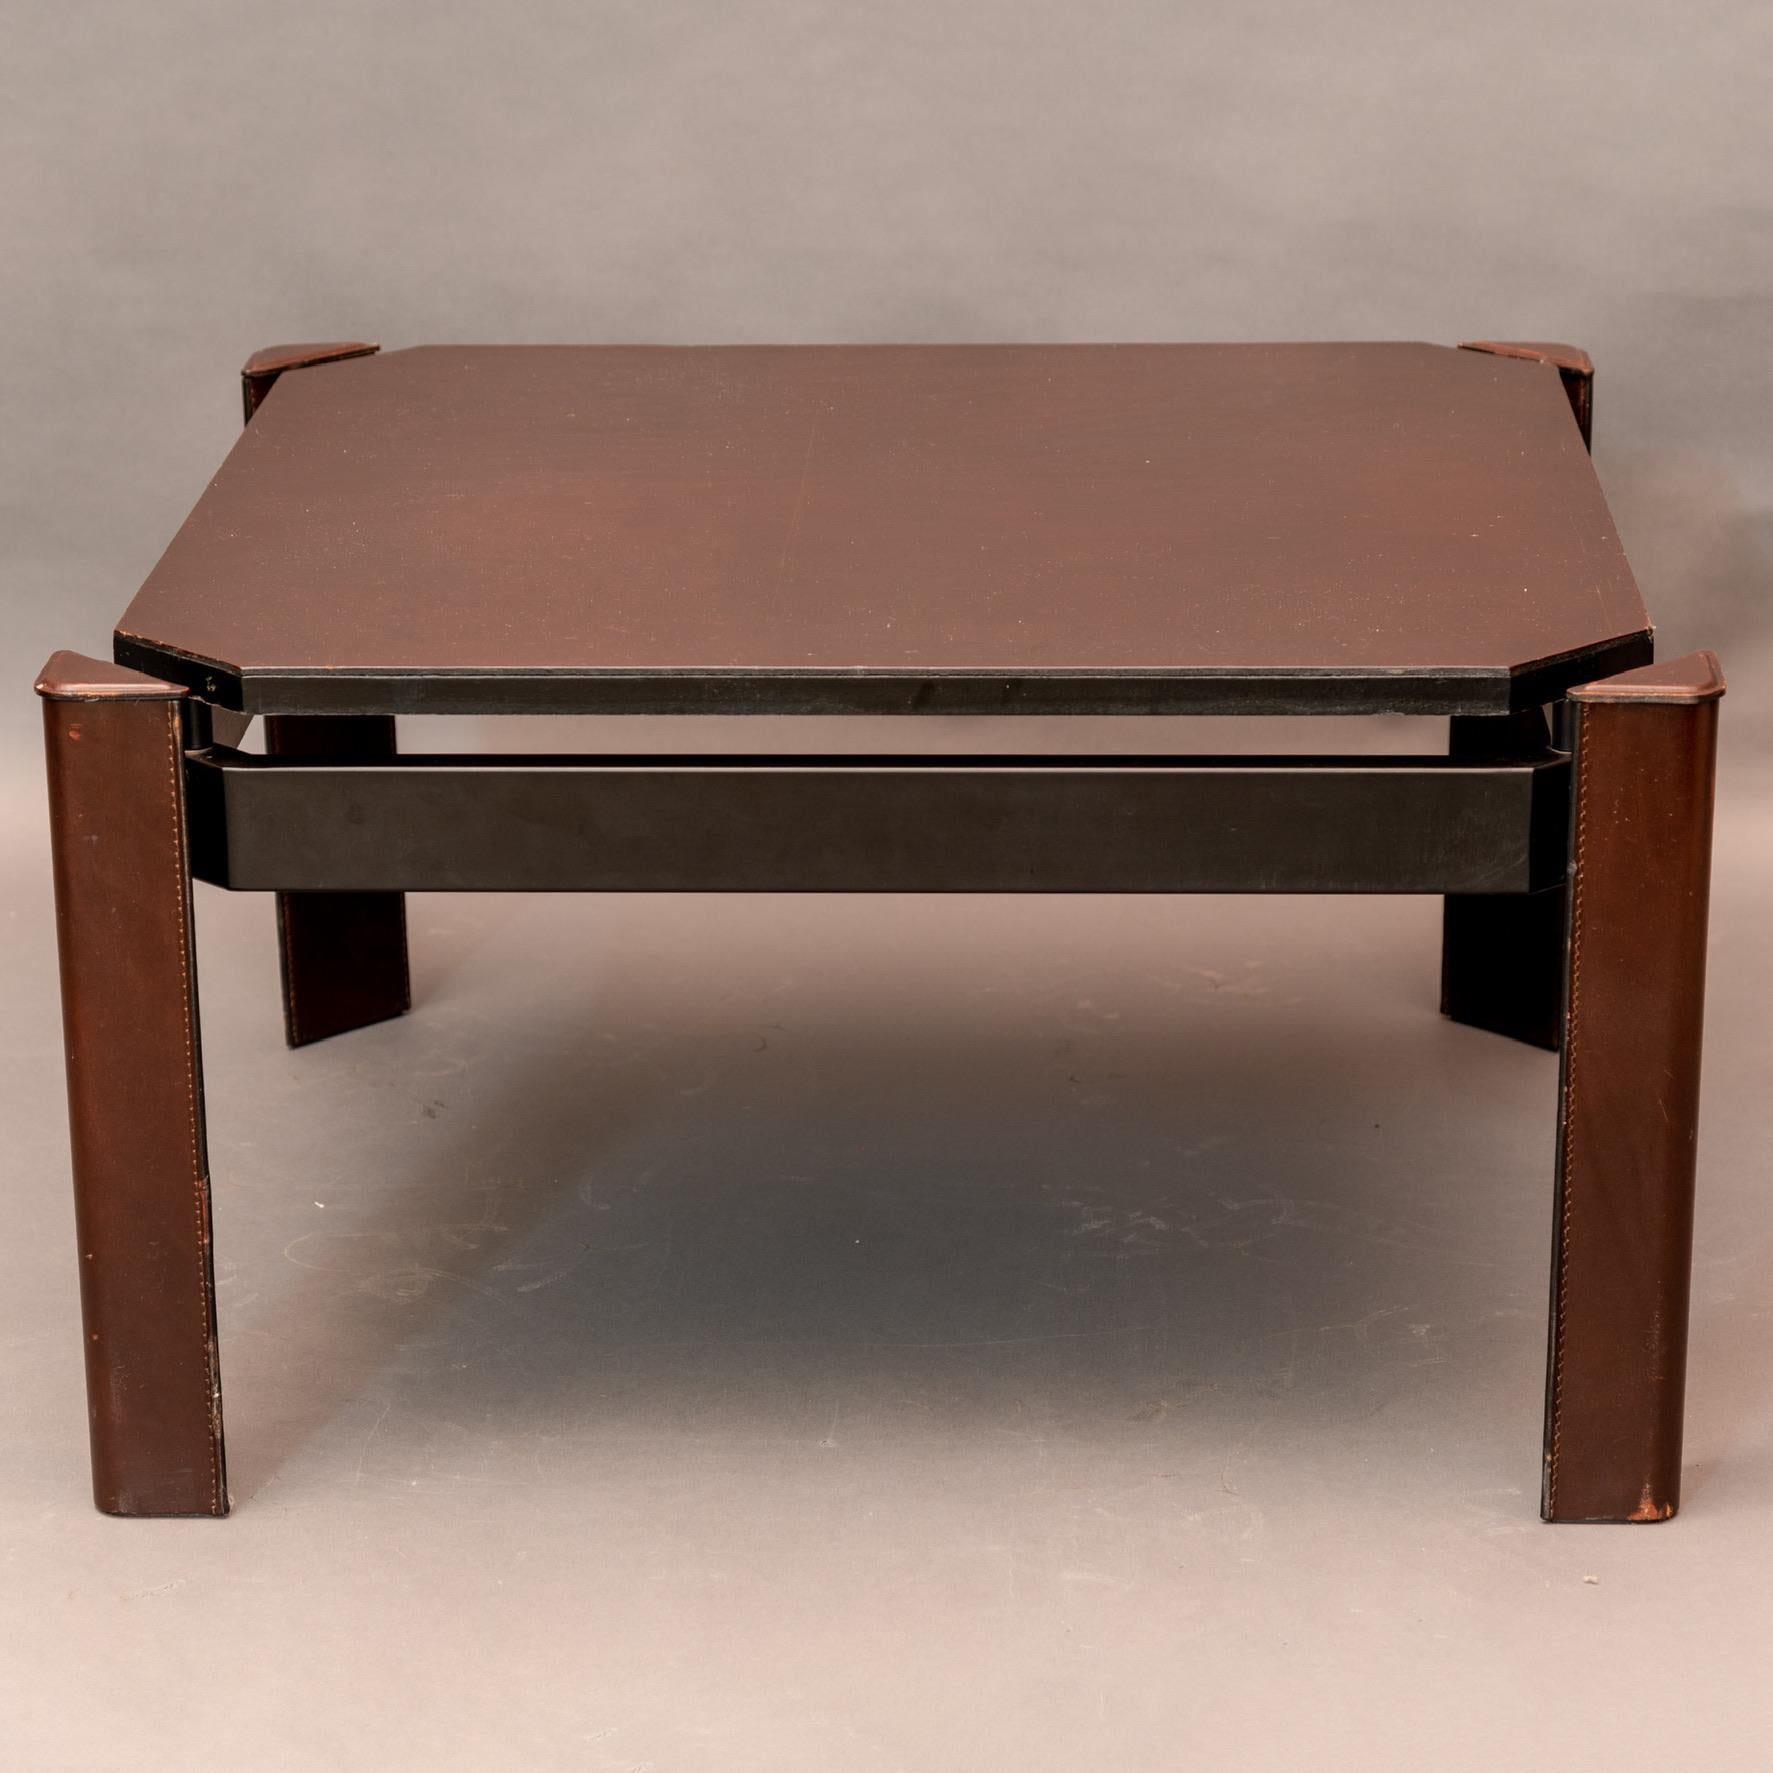 Low square coffee table with leather-covered top and triangular legs covered in brown leather. The section that supports the legs is lacquered metal.
This console comes from a set of furniture by Matteo Grassi, some of which are signed, furnishing a